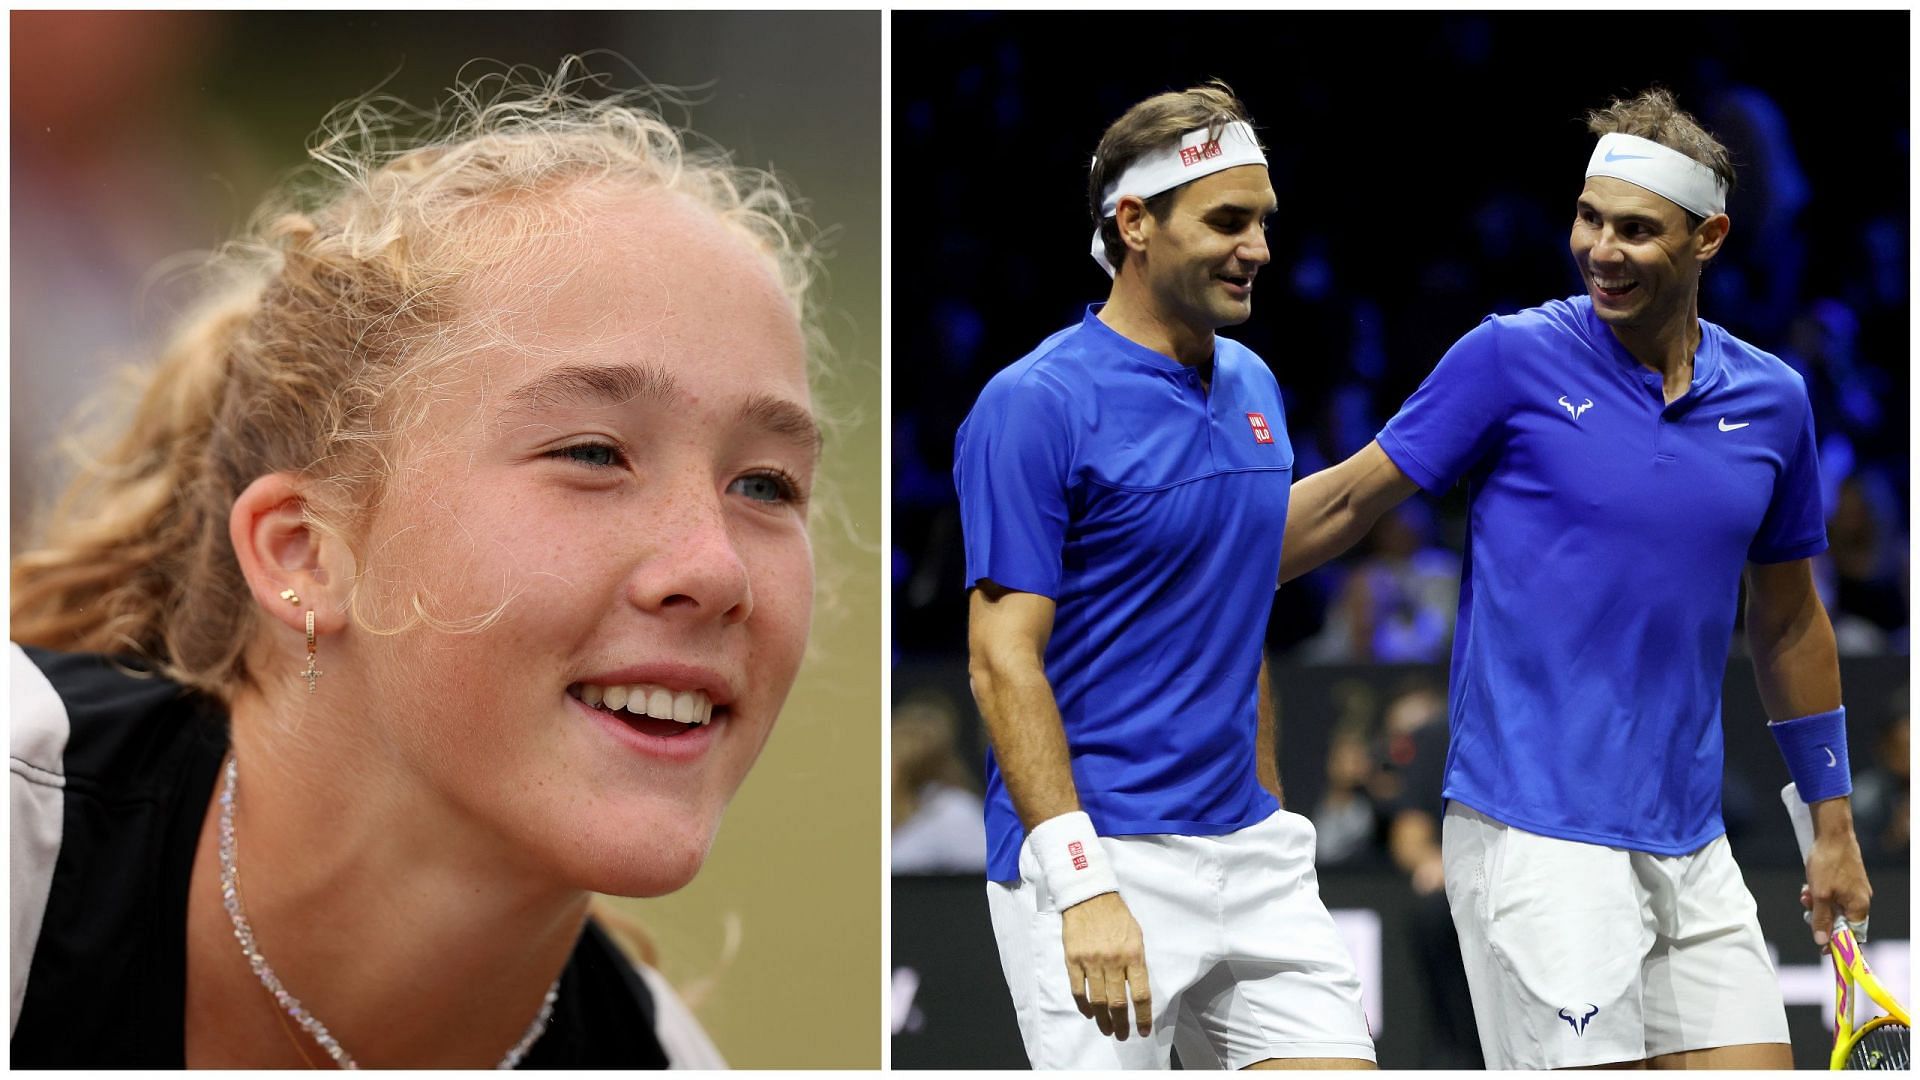 Mirra Andreeva grew up as a fan of Roger Federer and was impressed by Rafael Nadal